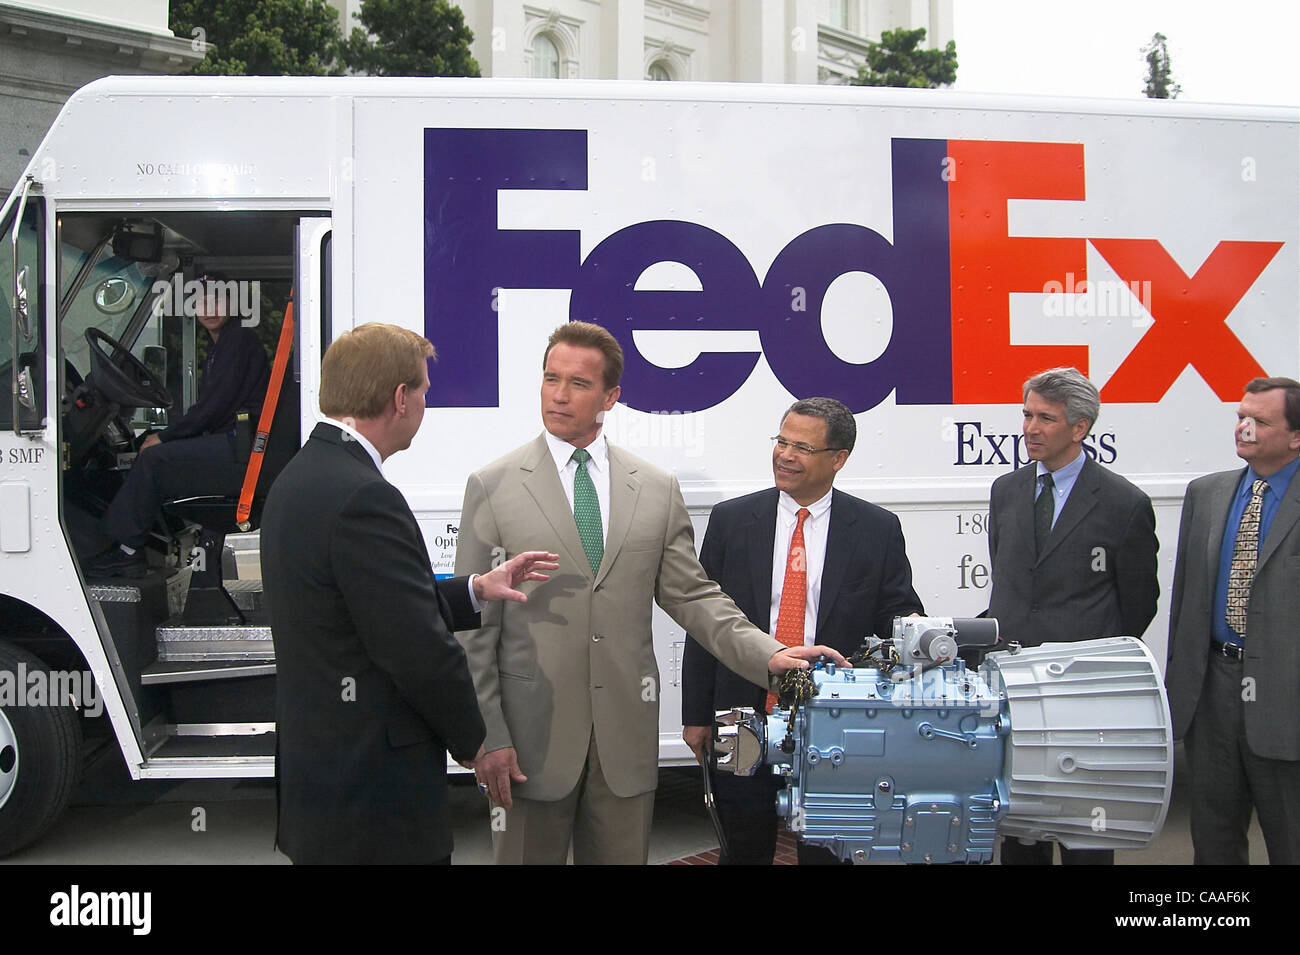 Mar 31, 2003; Sacramento, CA, USA; Environmental Defense, FedEx Express, and Eaton Corporation unveil new hybrid delivery trucks that emit 90% fewer emissions and go 50% further on a gallon of gas. (L to R: FedEx President and CEO David Bronczek, California Governor Arnold Schwarzenegger, Jim Sweetn Stock Photo